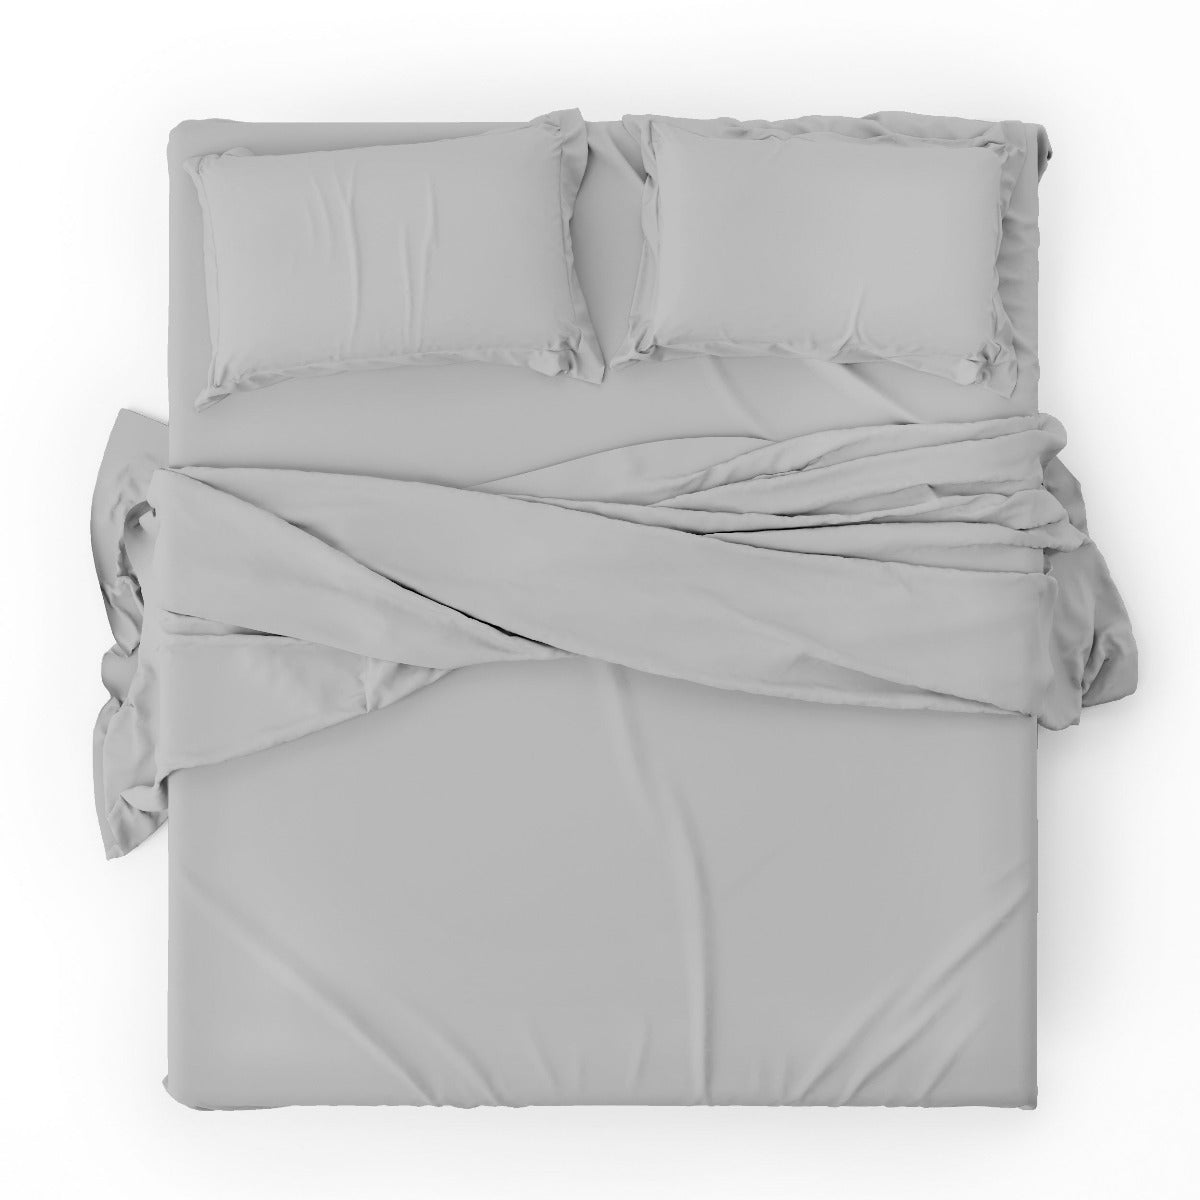 Duvet cover with pillowcases - Solid Color Pearl Gray